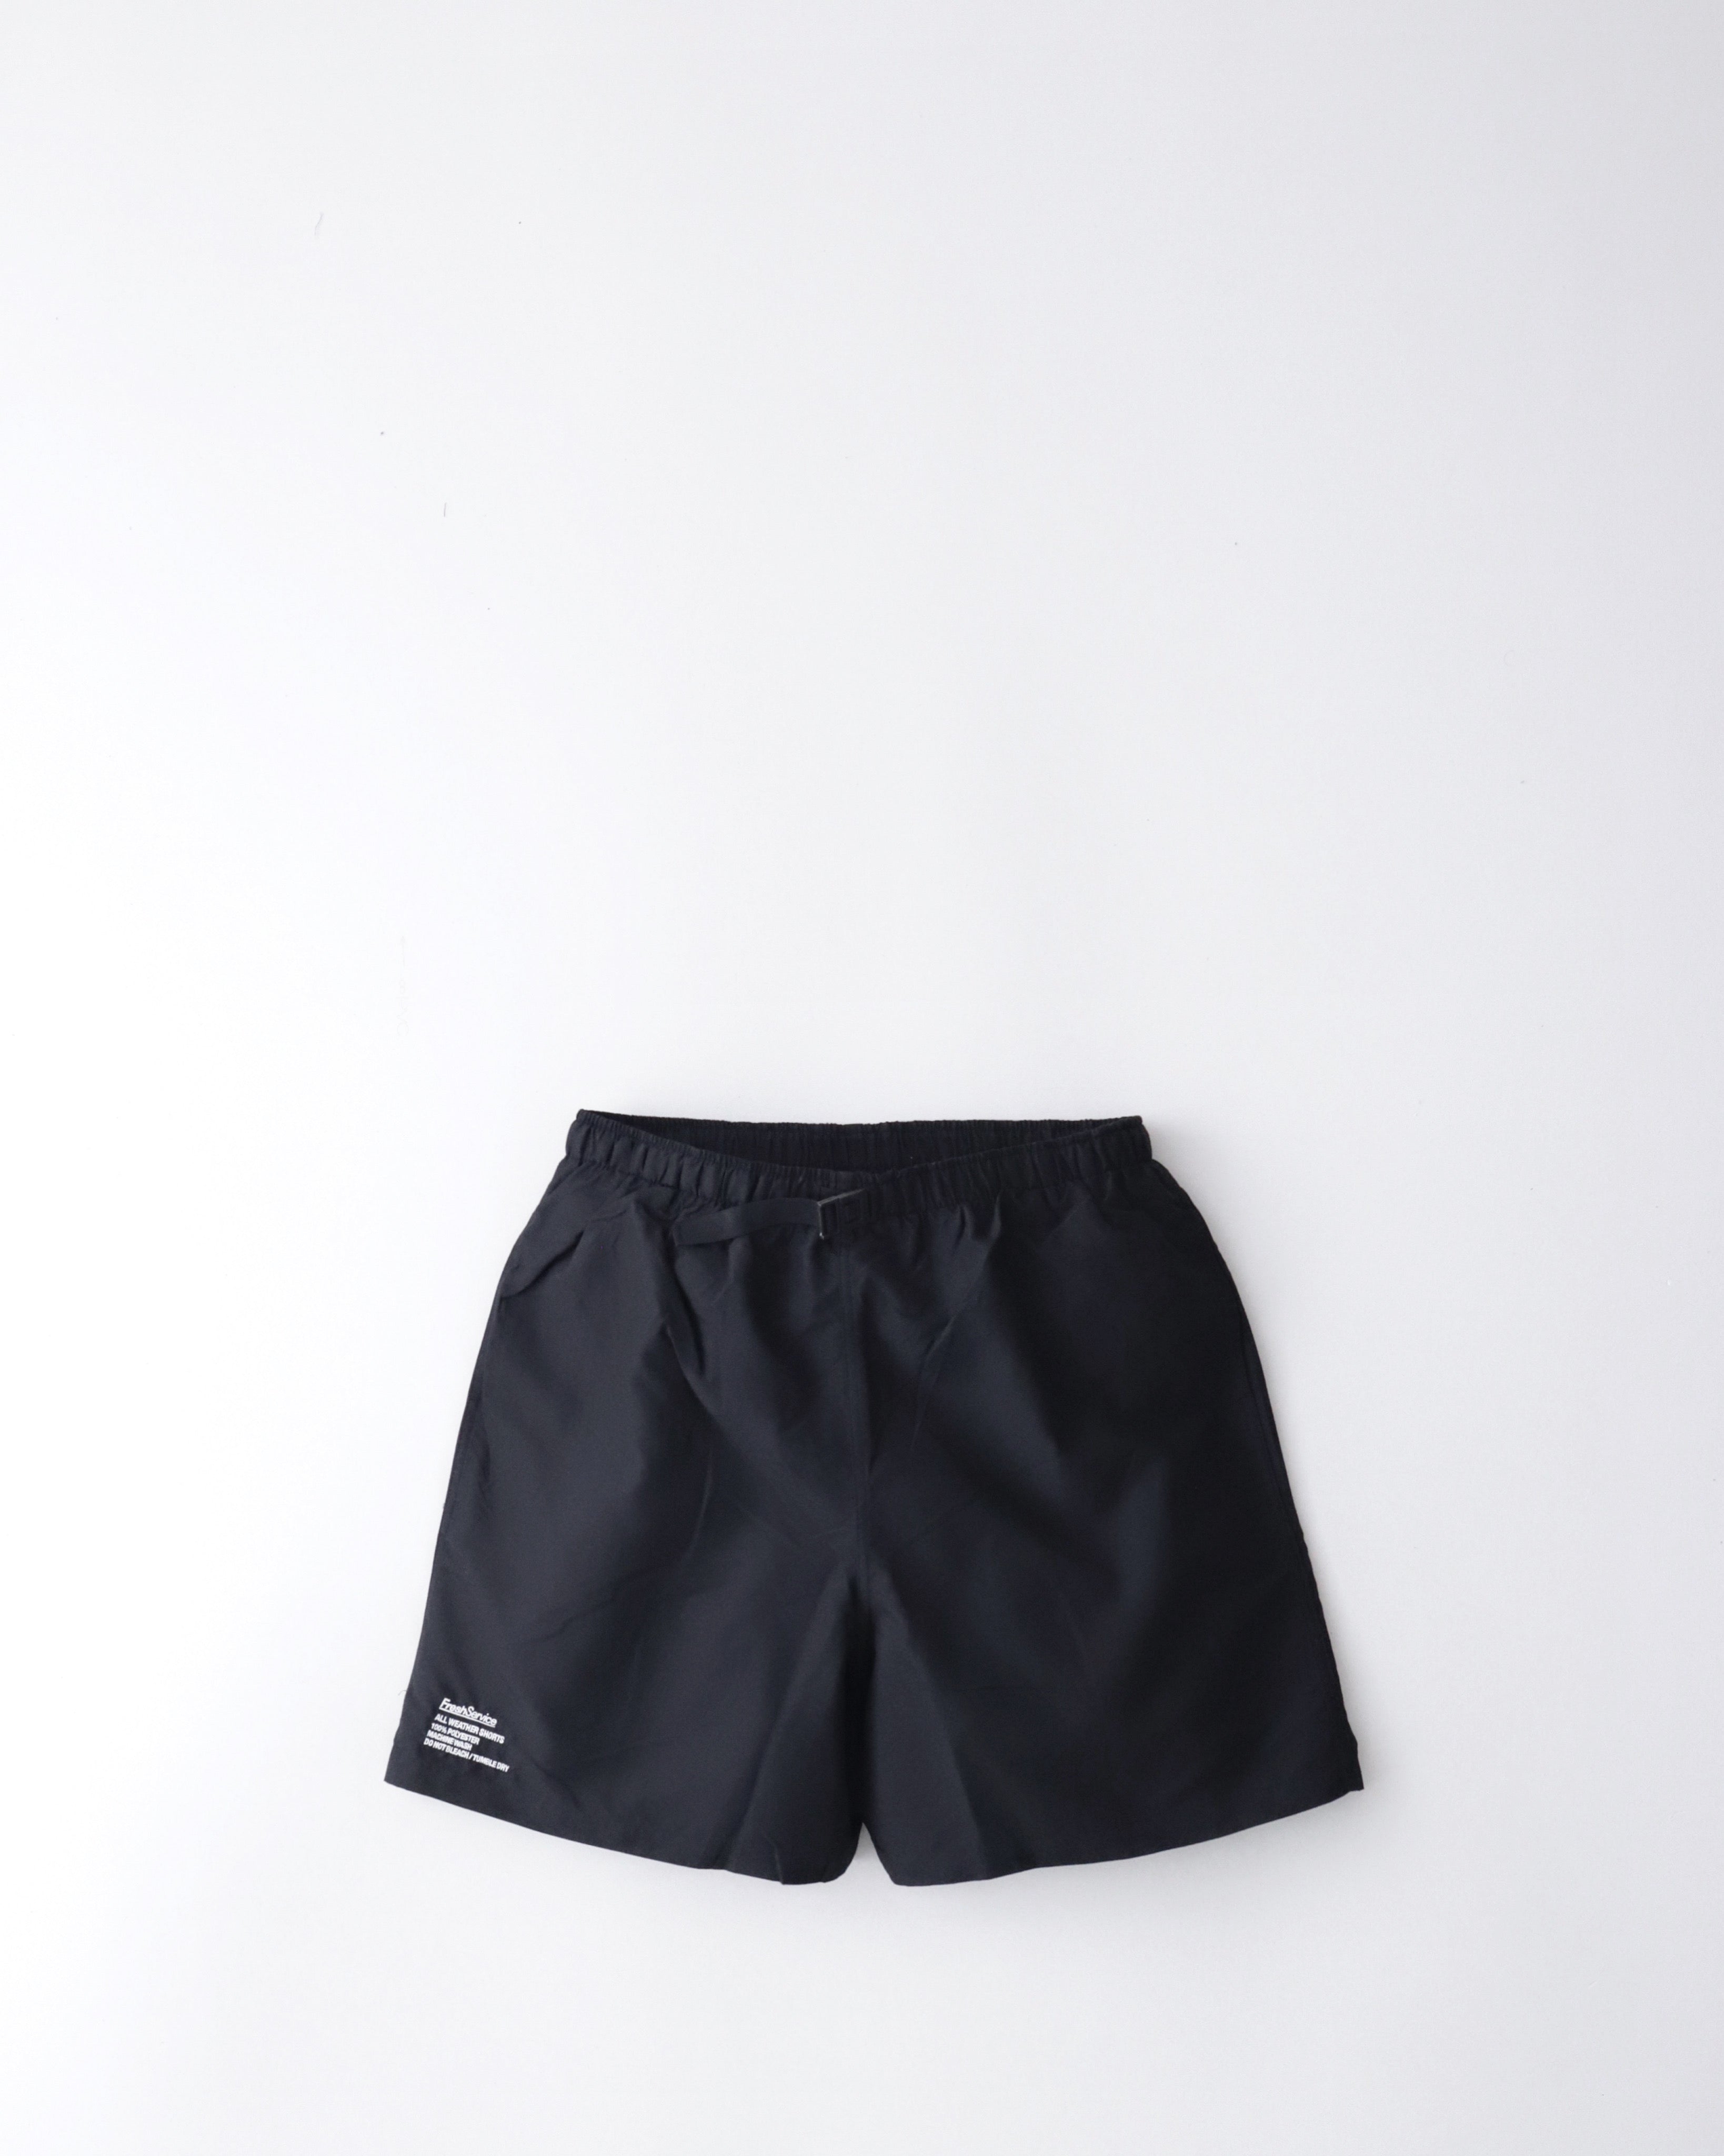 ALL WEATHER SHORTS – NCNR WEB STORE